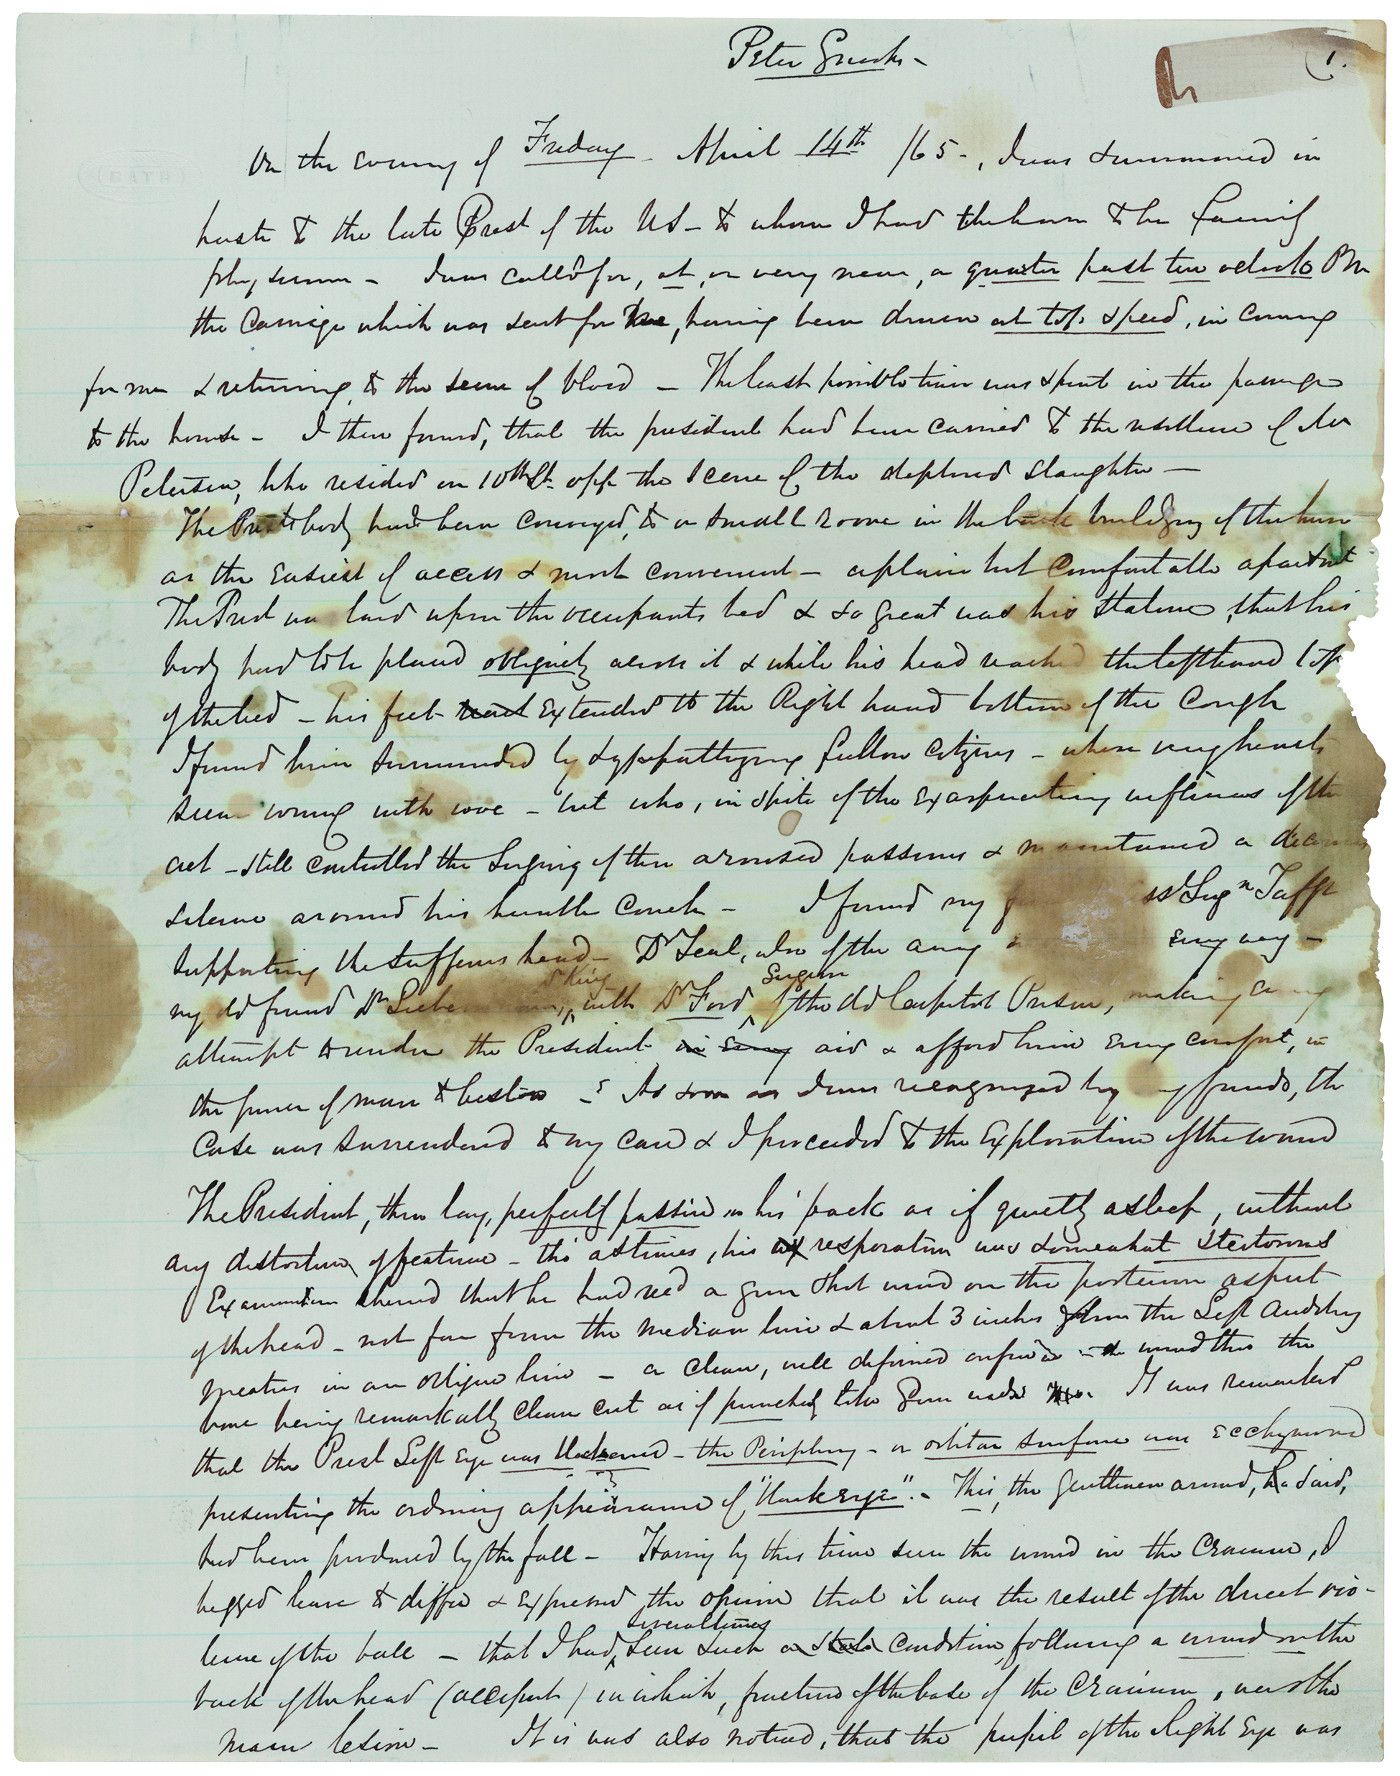 Abraham Lincoln’s Final Hours, Death, and Autopsy Report Documented by Dr. Robert Stone
